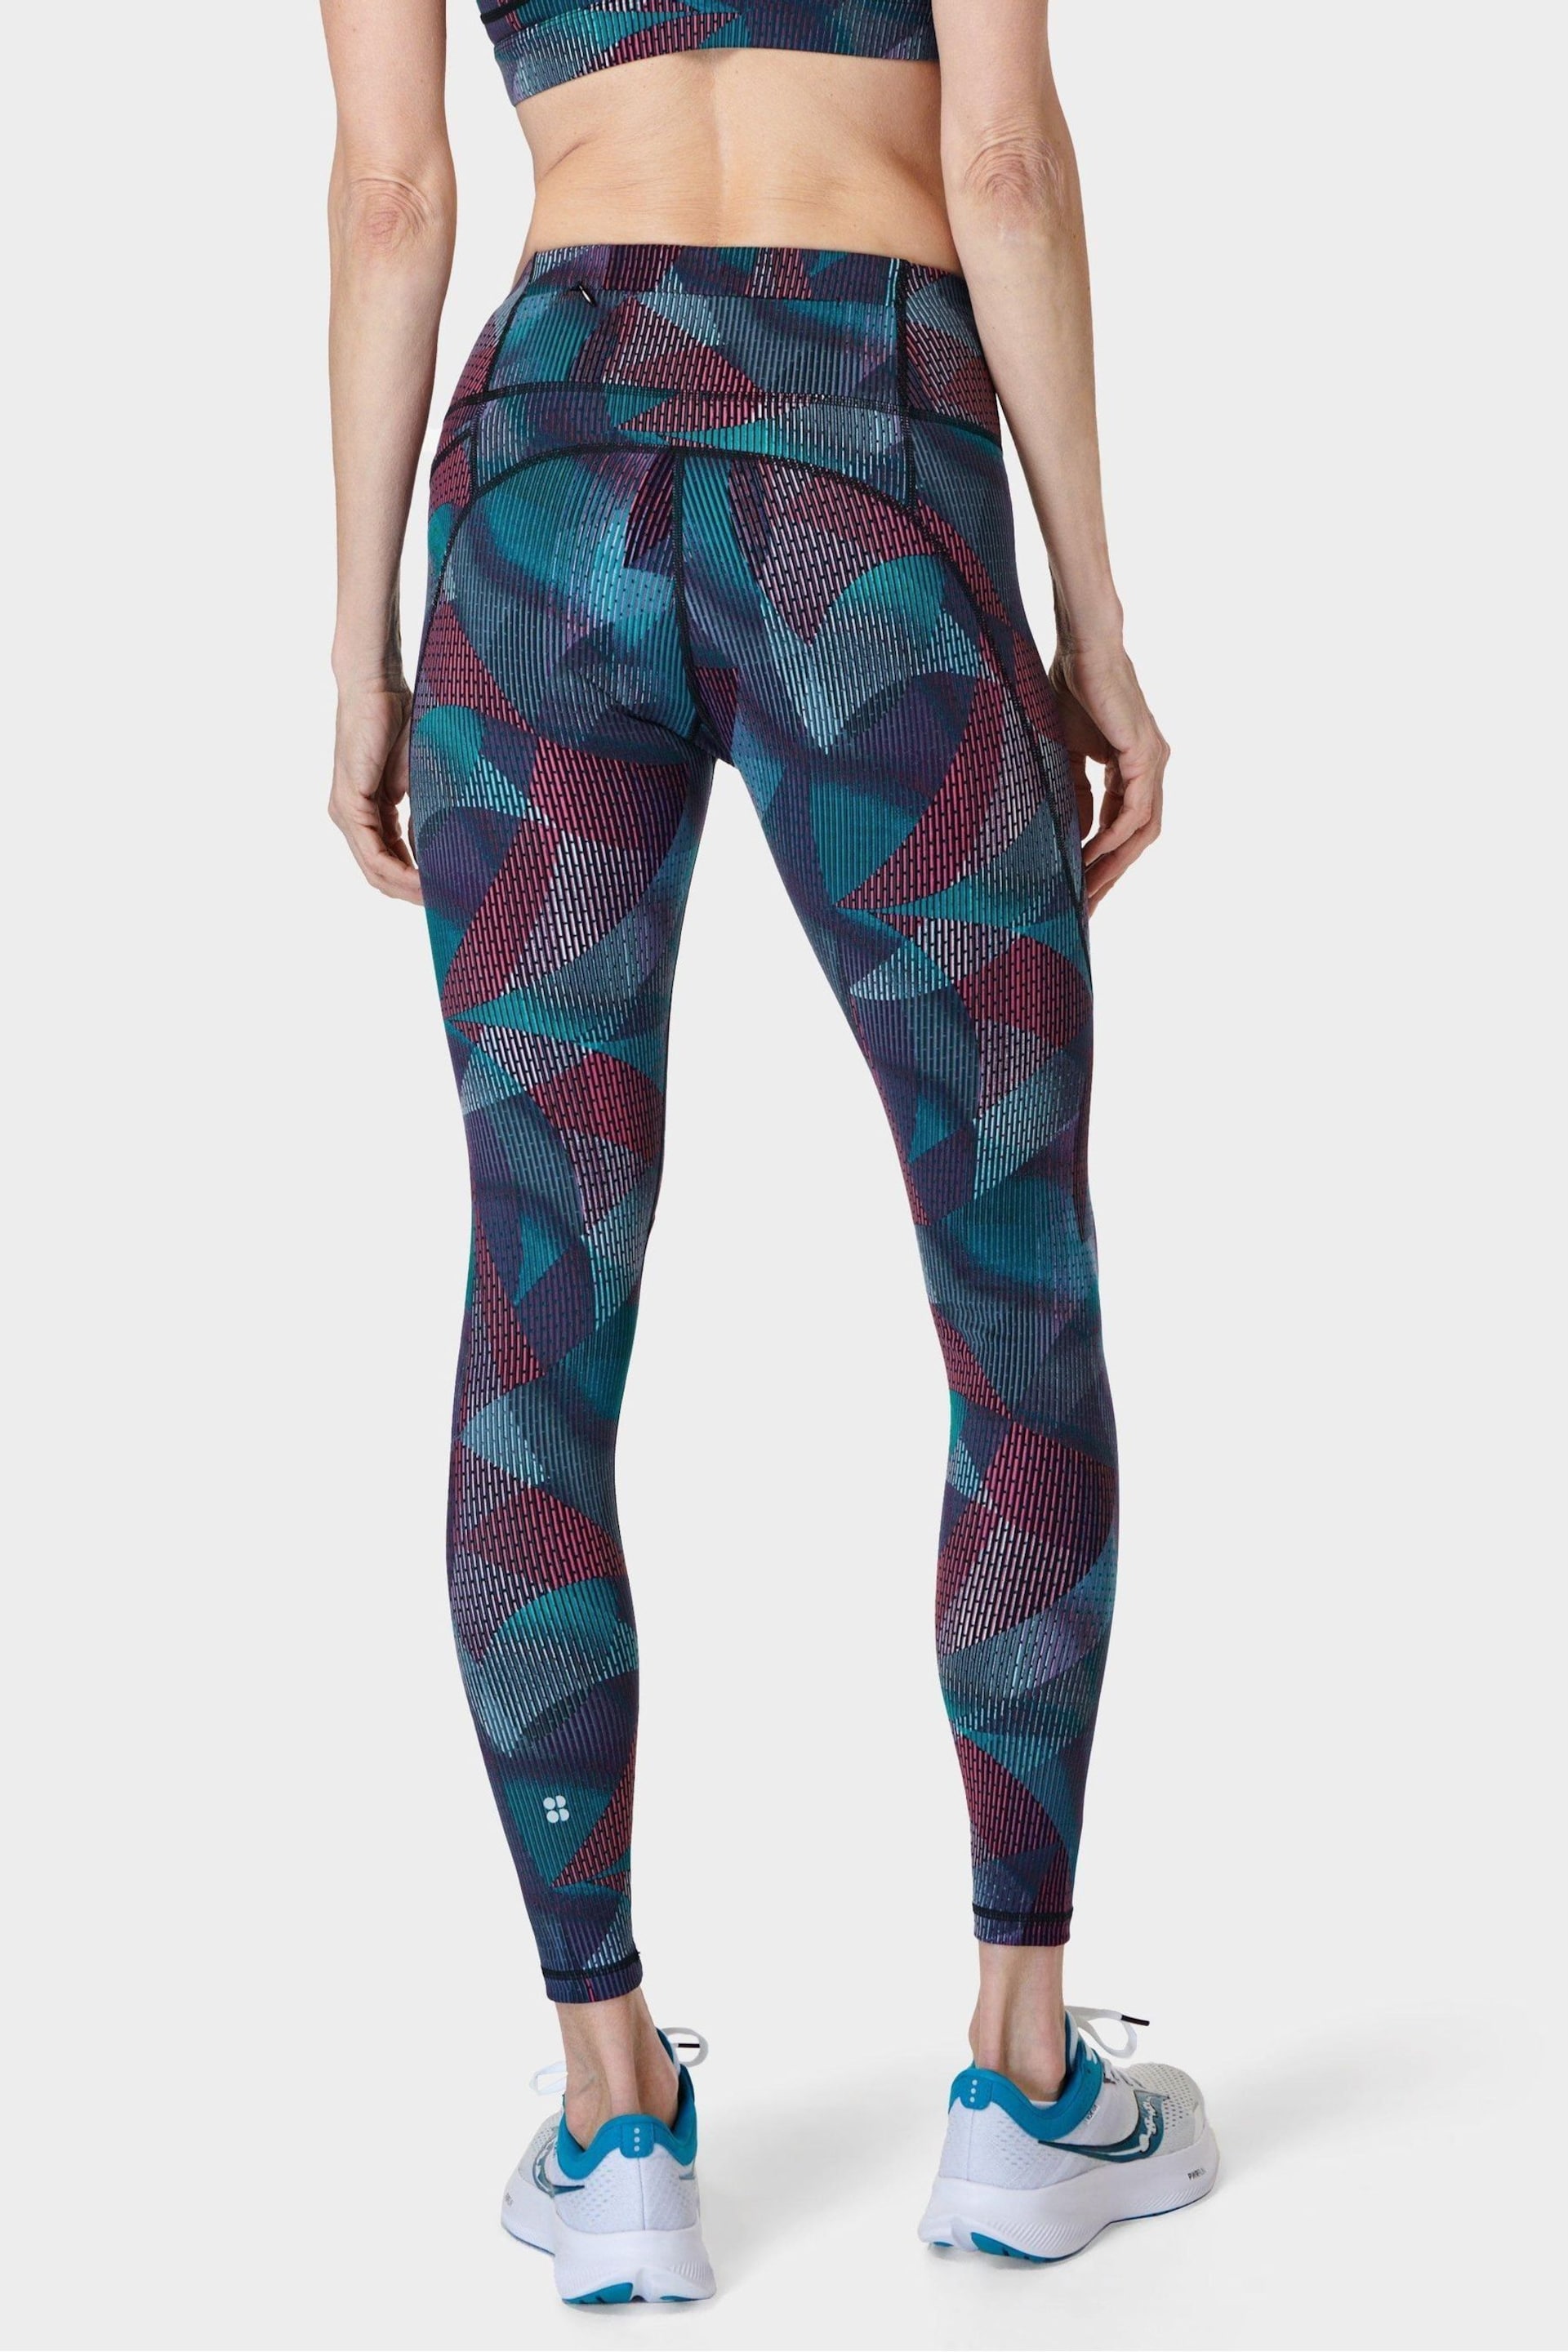 Sweaty Betty Grey Gradient Shapes Print Full Length Power Workout Leggings - Image 2 of 9